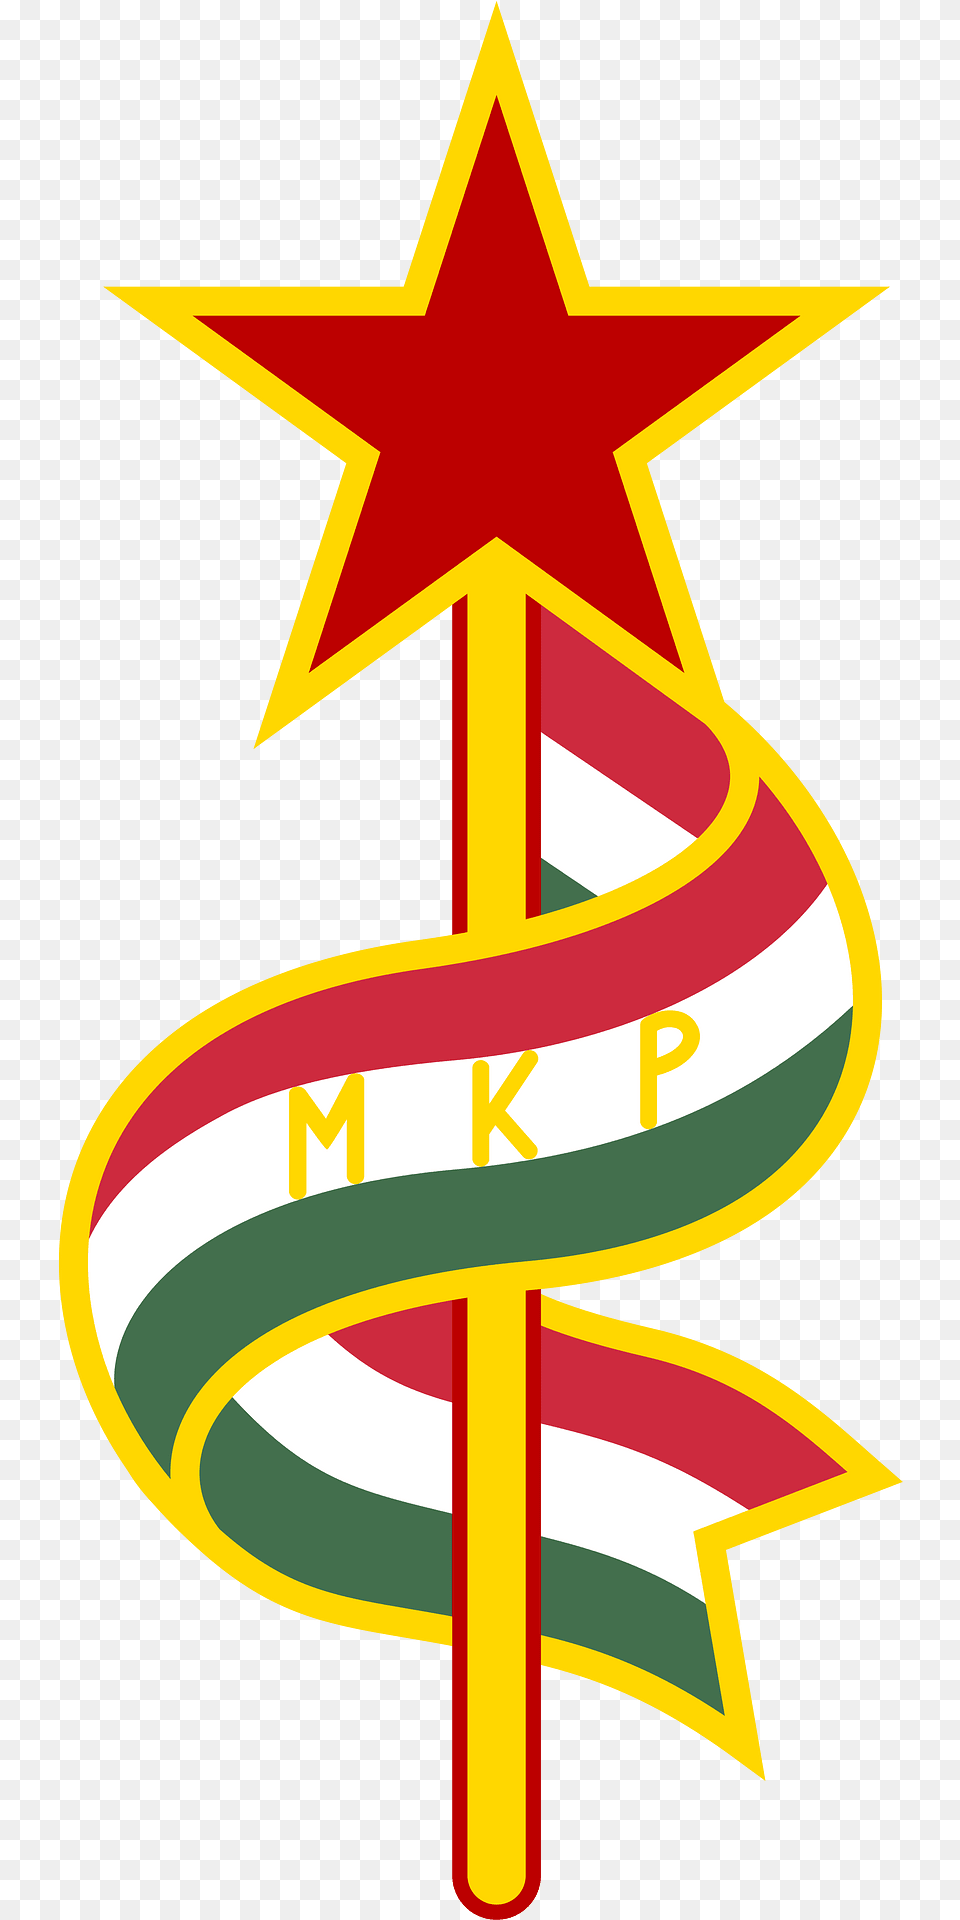 Logo Of The Hungarian Communist Party Variant Clipart, Symbol, Star Symbol Png Image